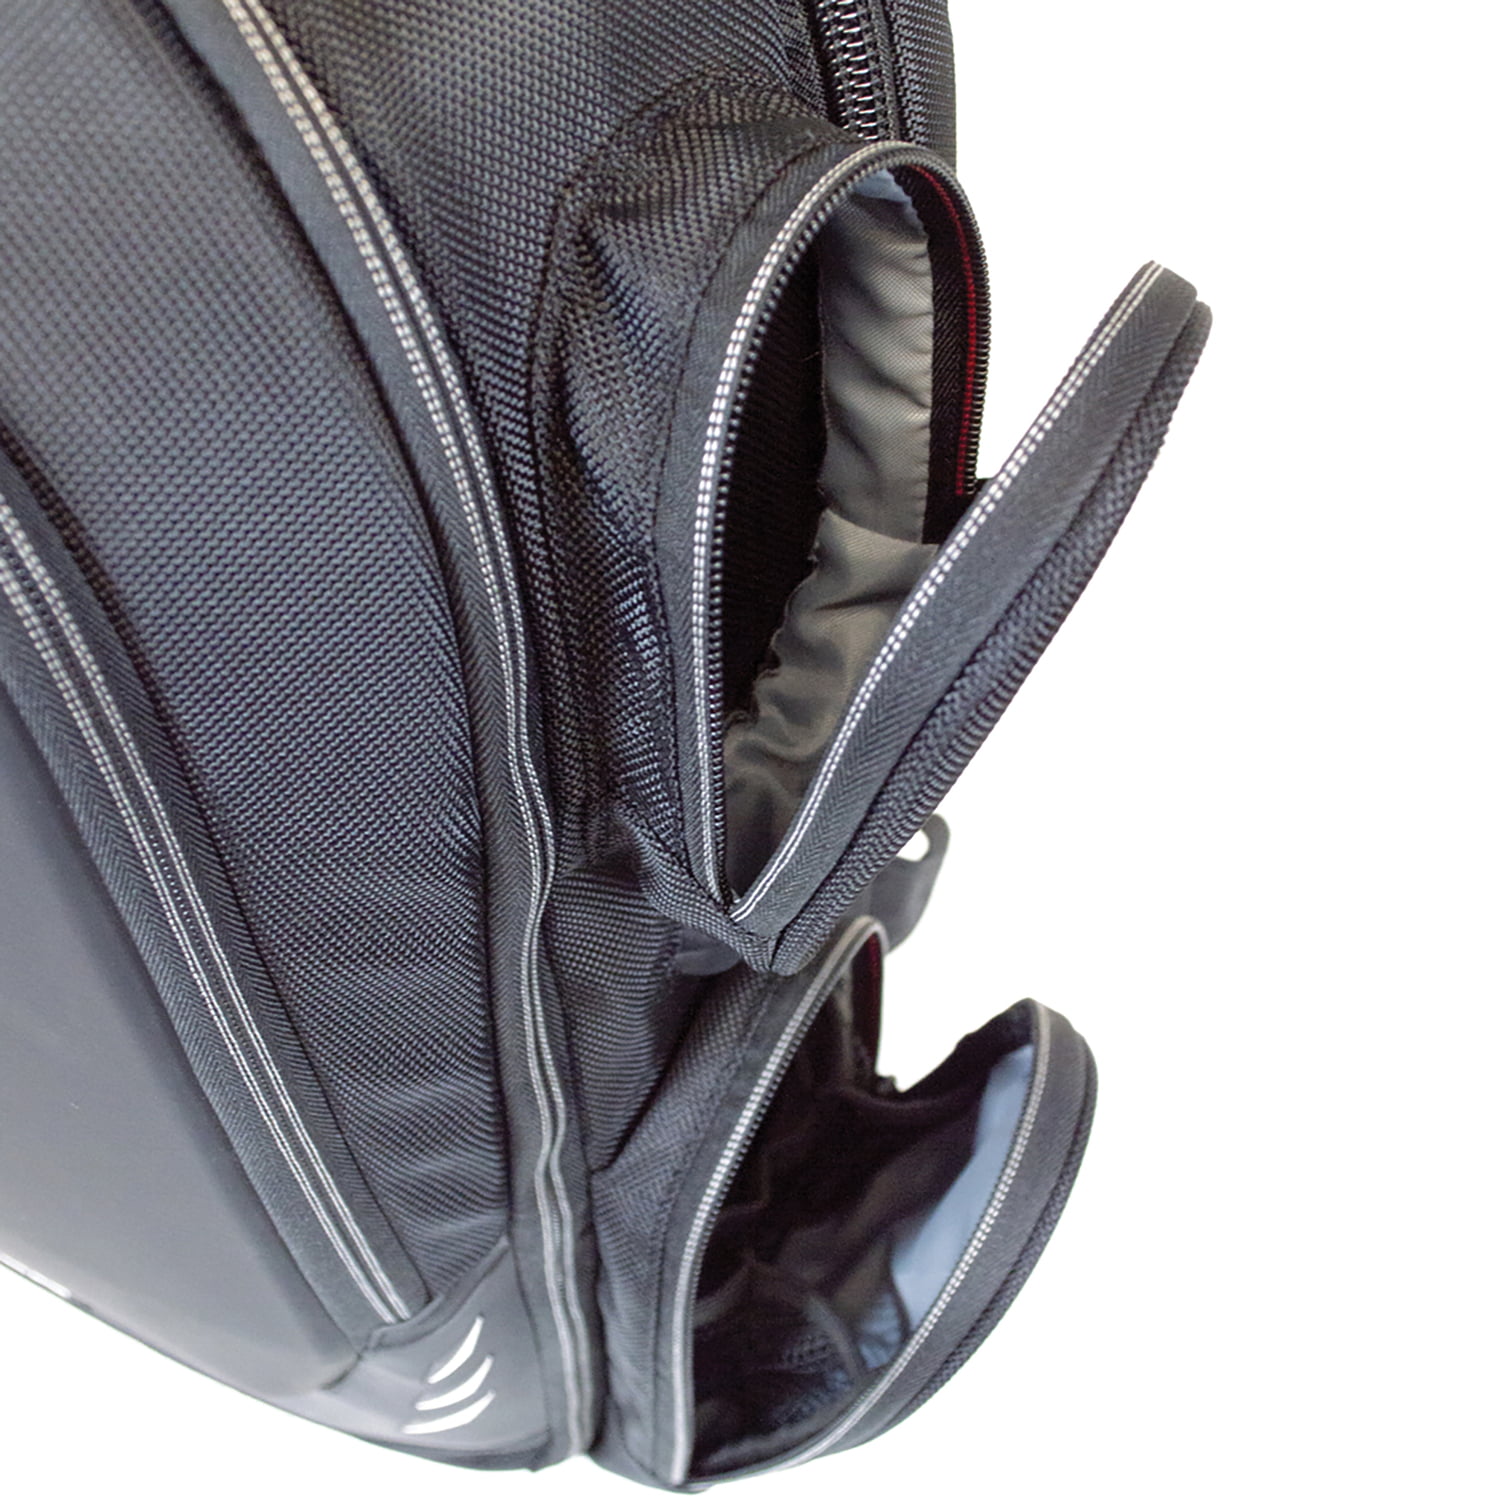 Mobile Edge Graphite Backpack 17.3 For Professionals and Students